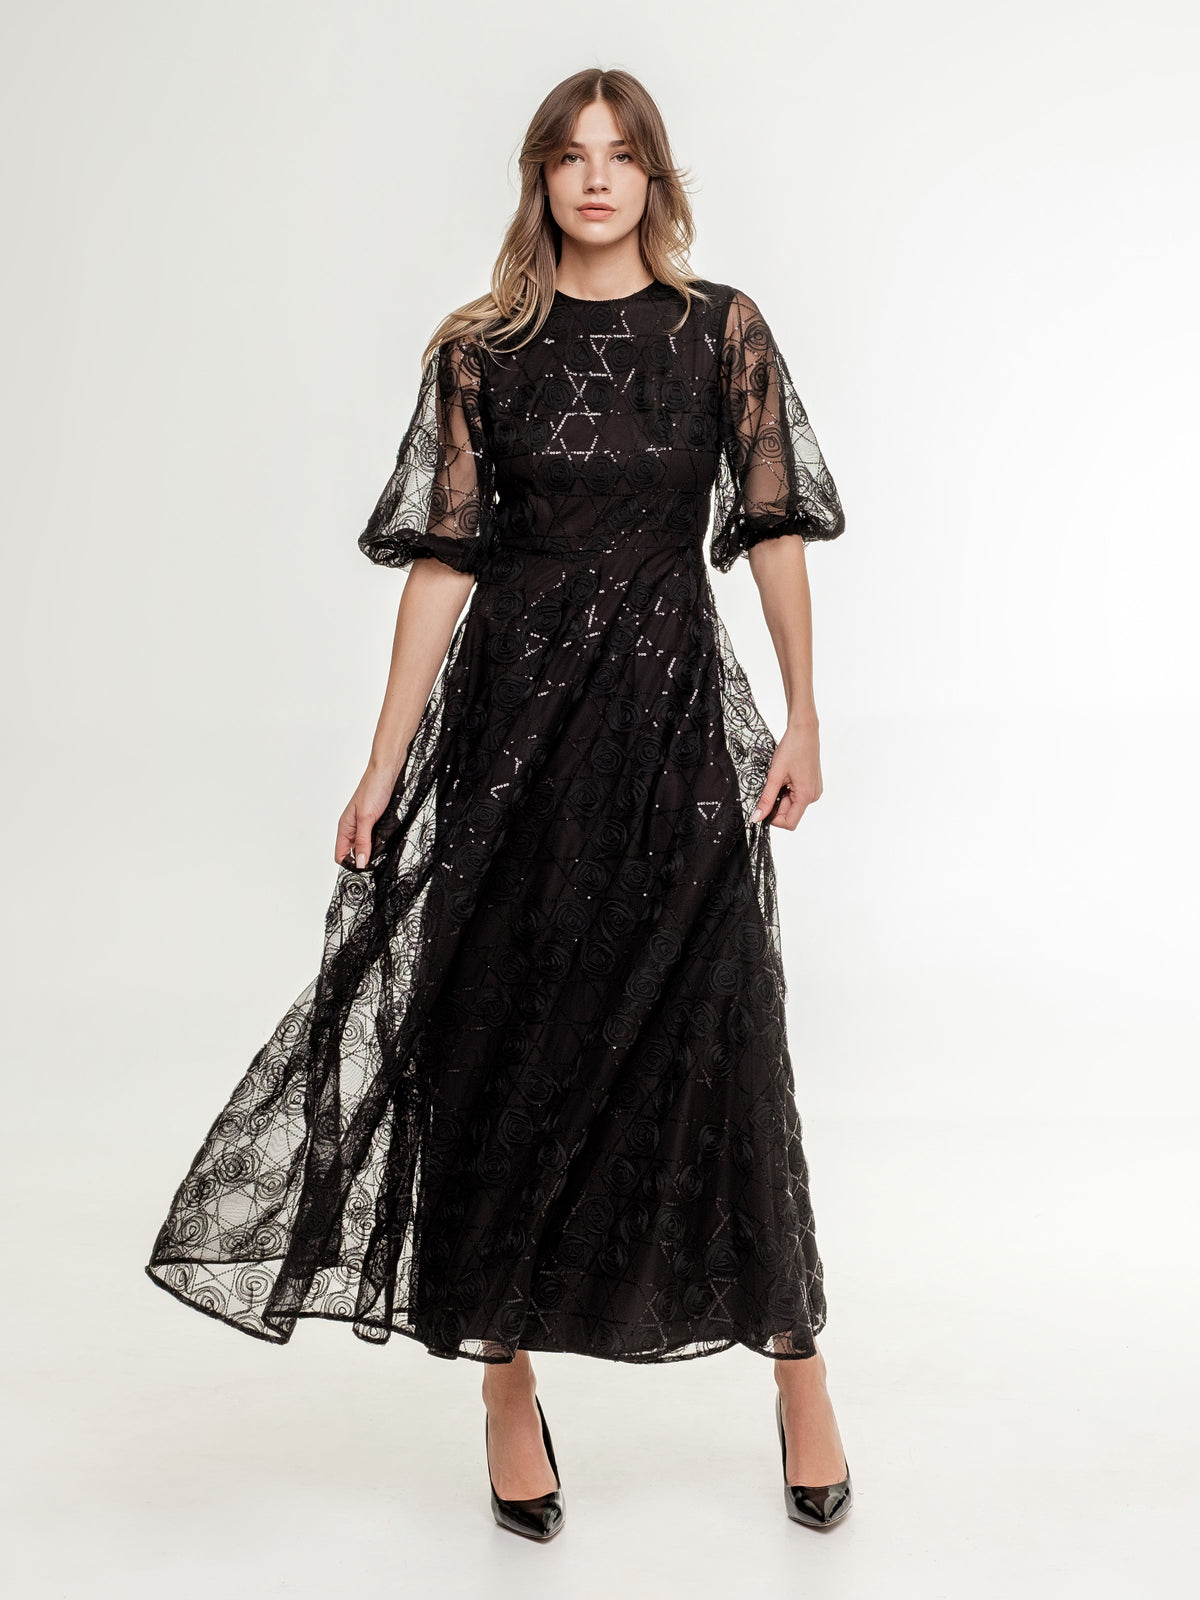 Luxurious_black_lace_dress_with_sequins_wide_skirt transparent medium long sleeves